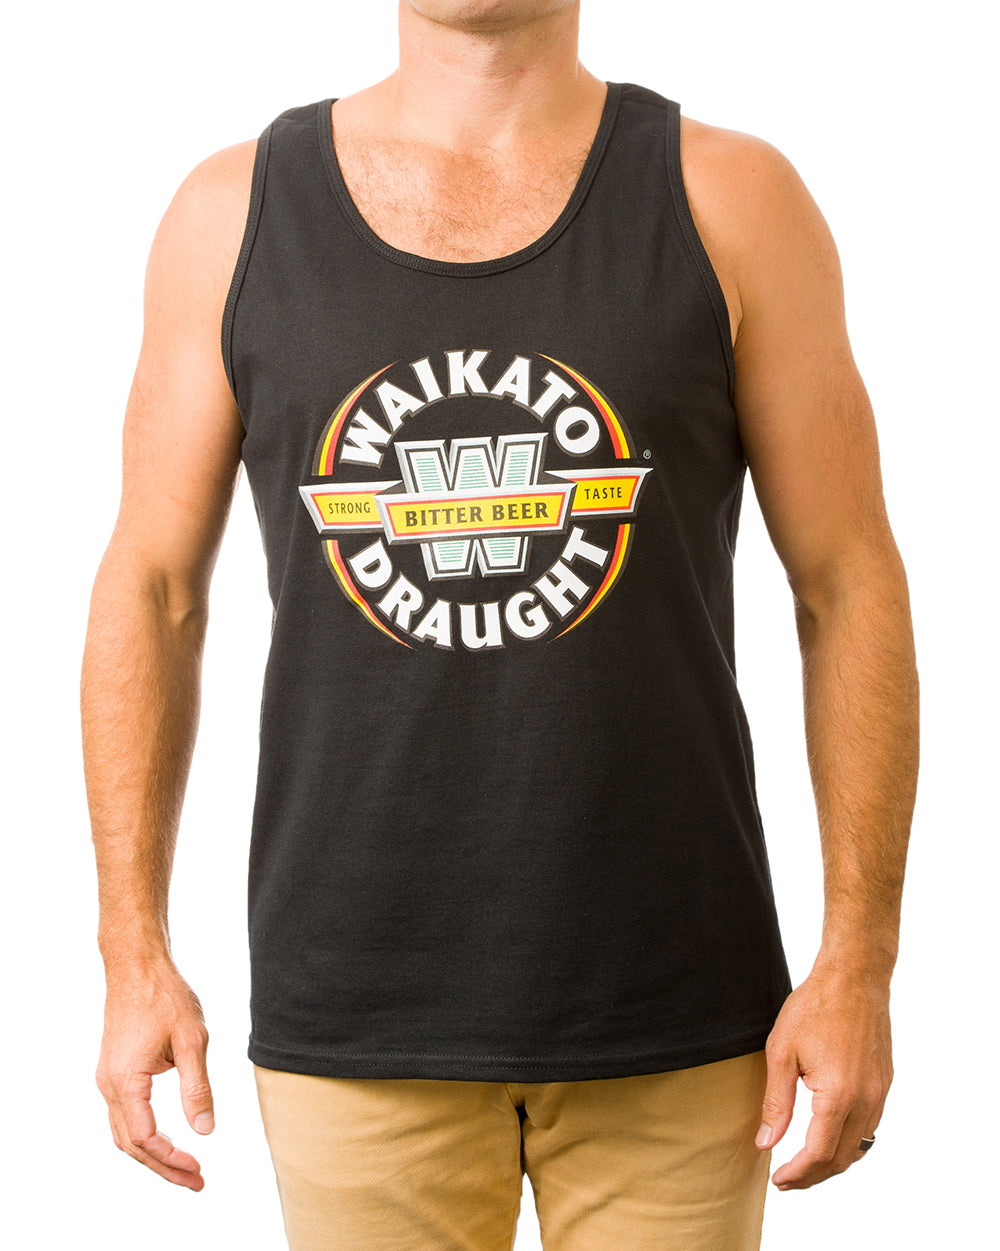 Waikato Draught Singlet -  Beer Gear Apparel & Merchandise - Speights - Lion Red - VB - Tokyo Dy merch